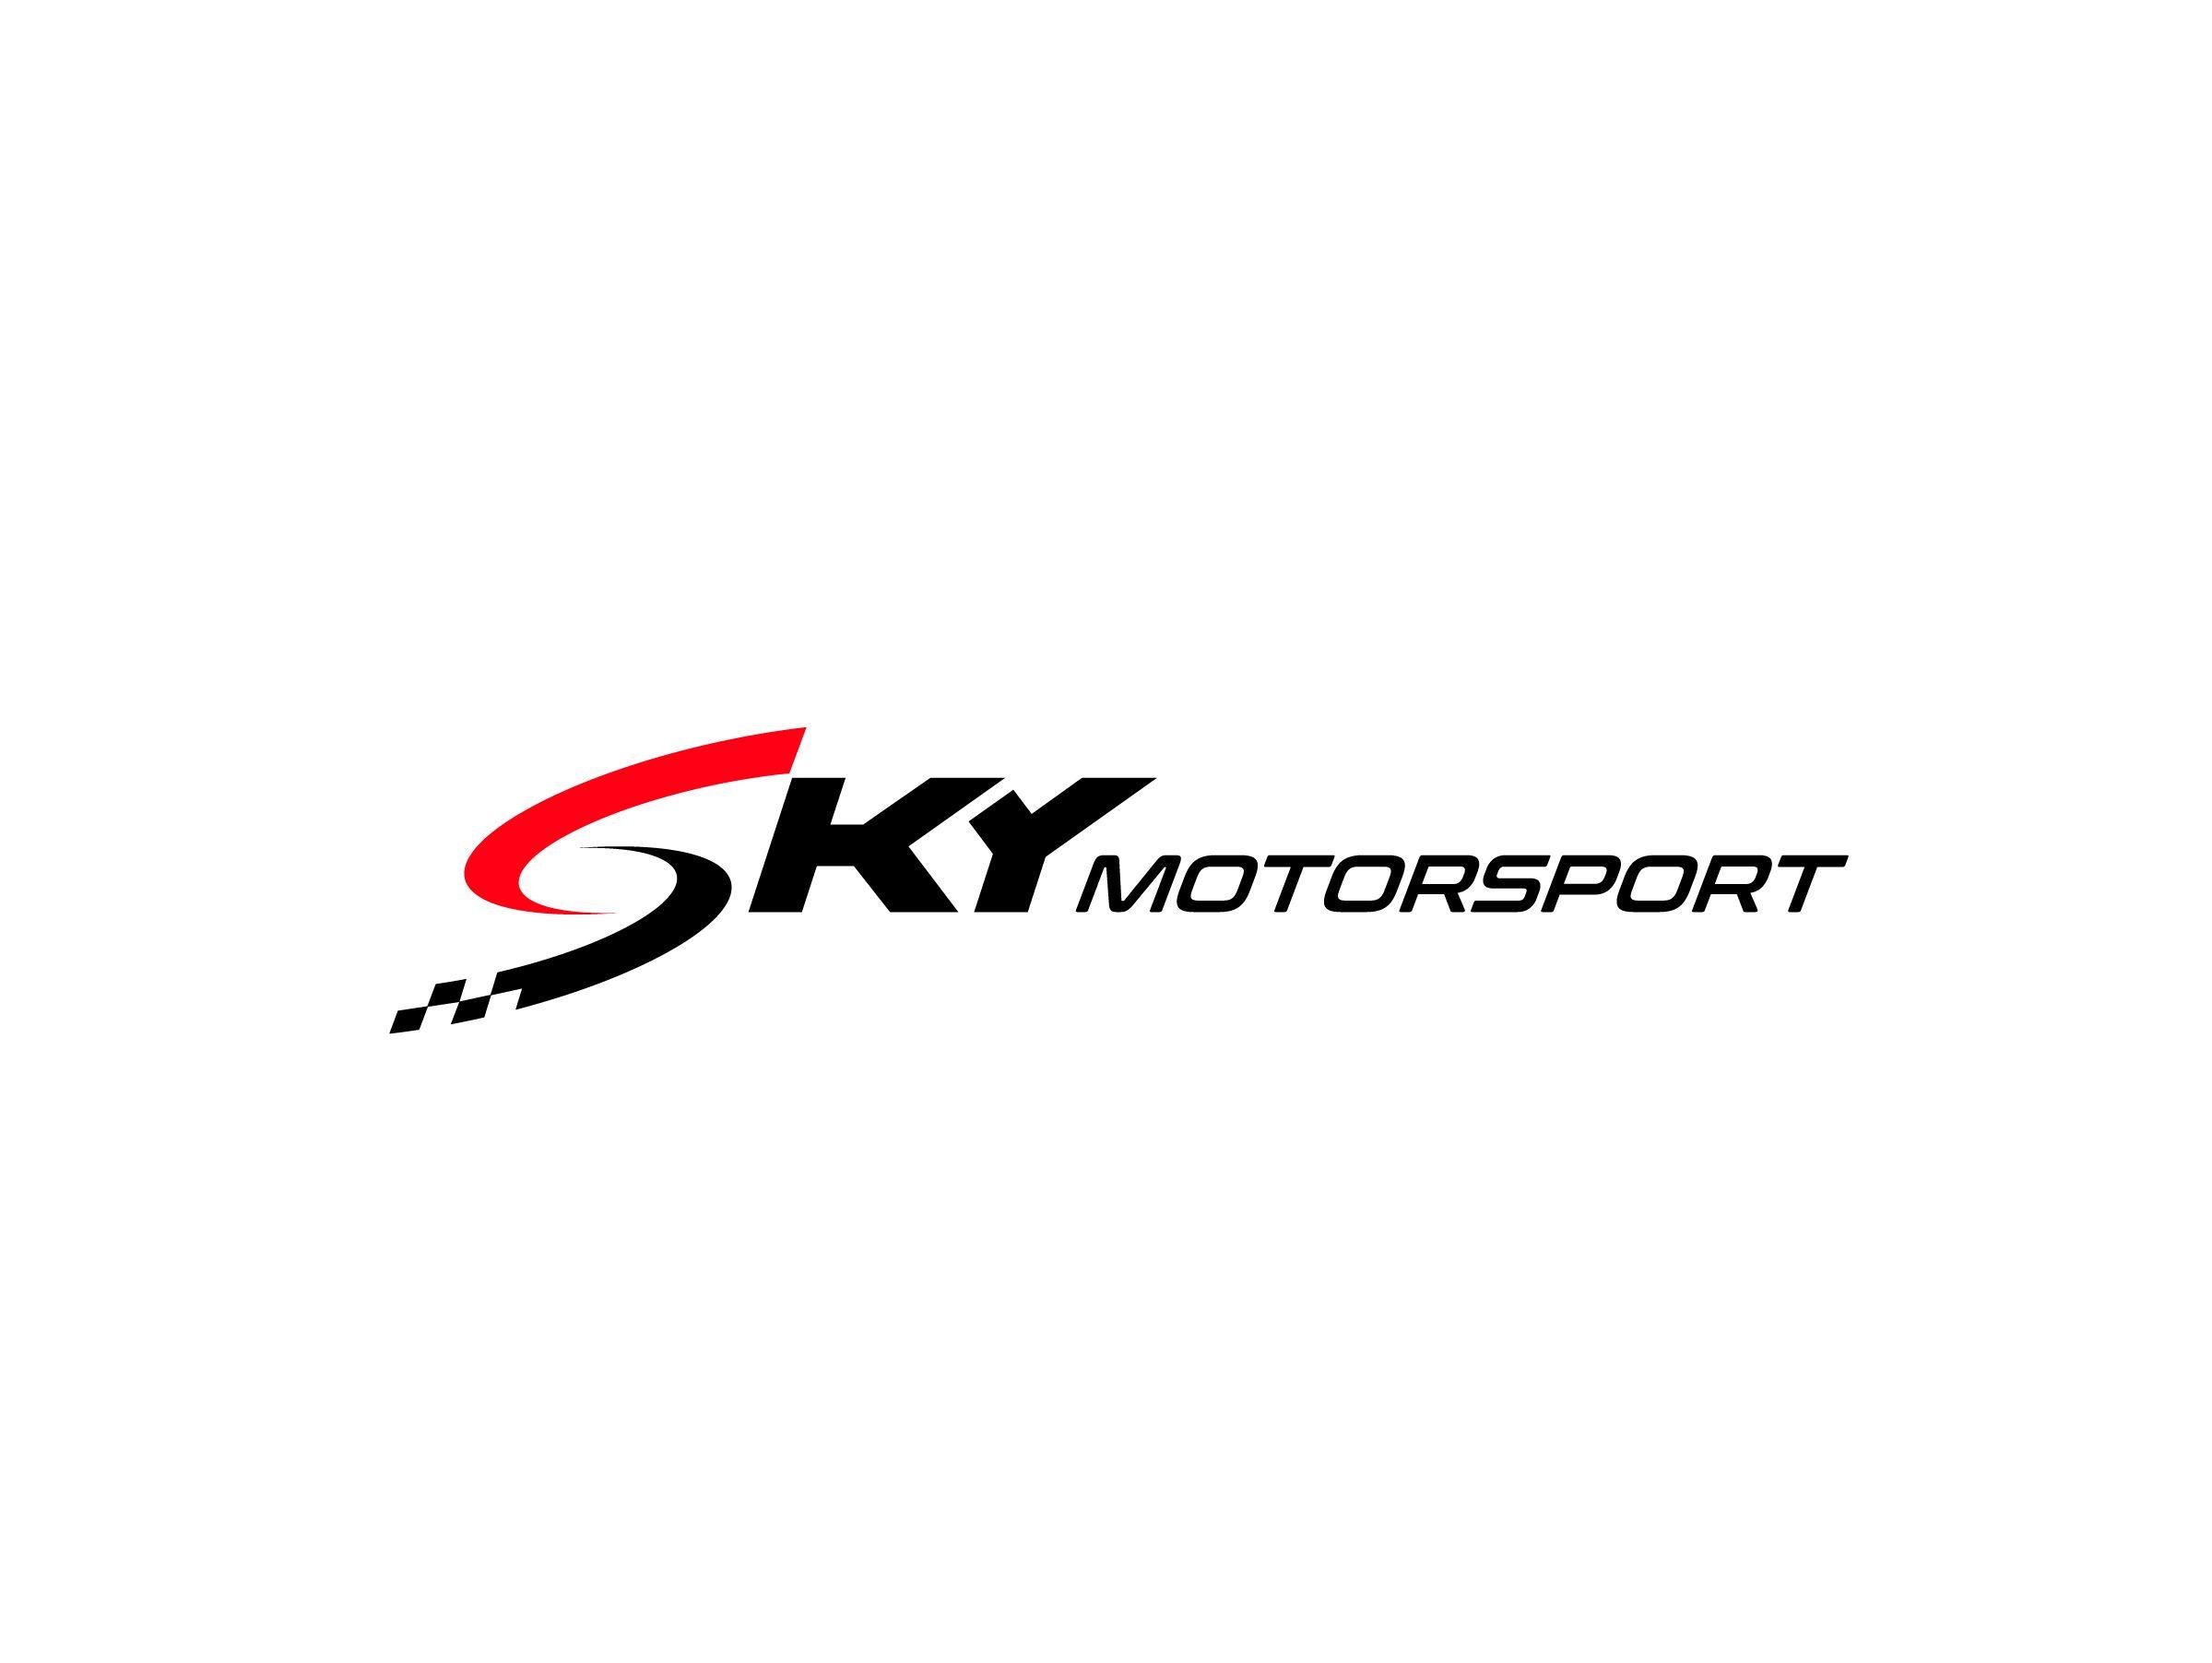 Modern Company Logo - Modern and Simple Logo for a Motorsport Racing Company #motorsports ...